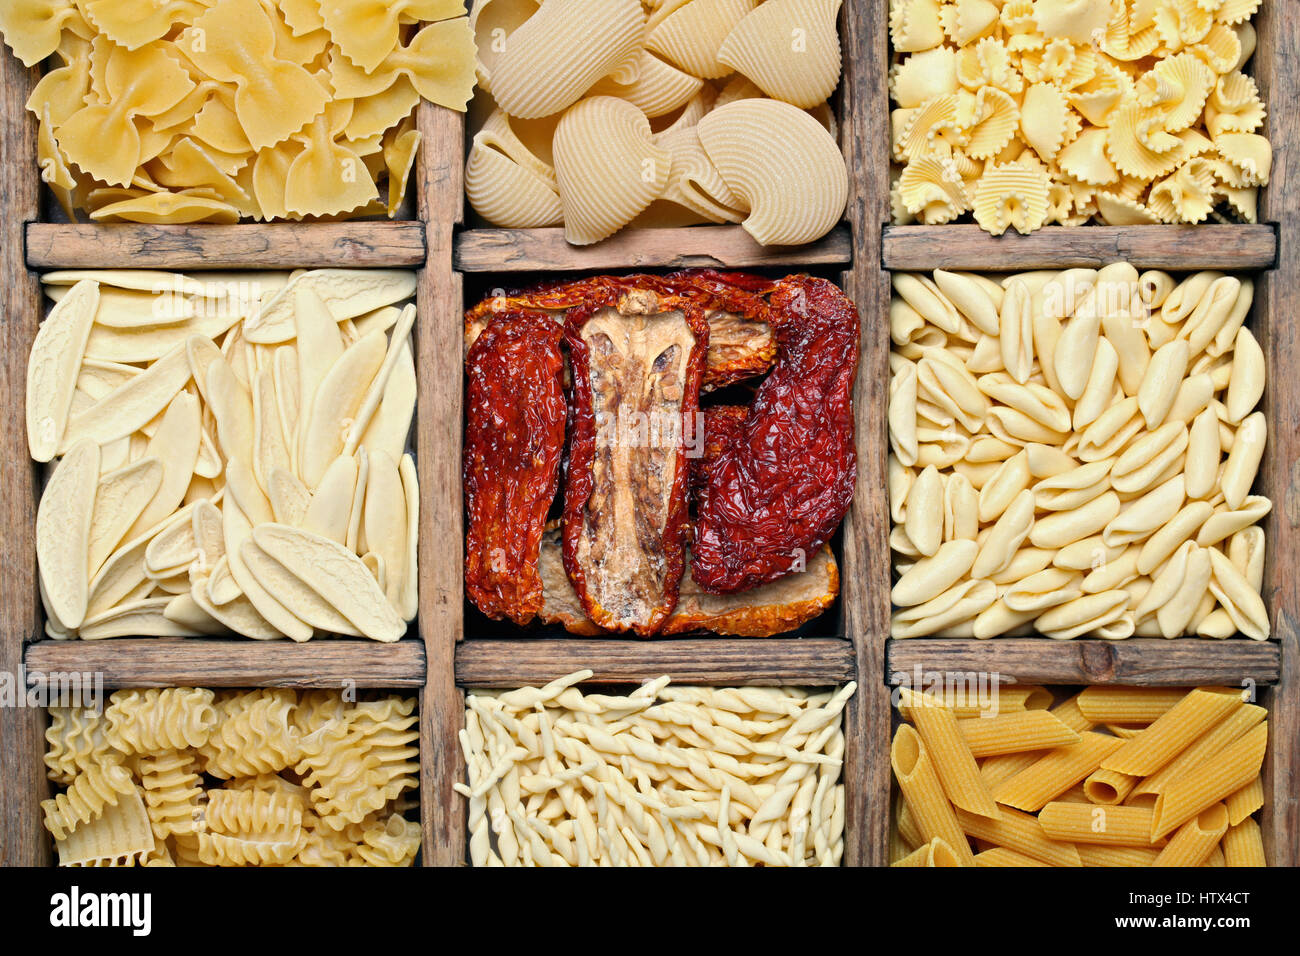 Background image of italian pasta. Various pasta in a wooden antique box Stock Photo